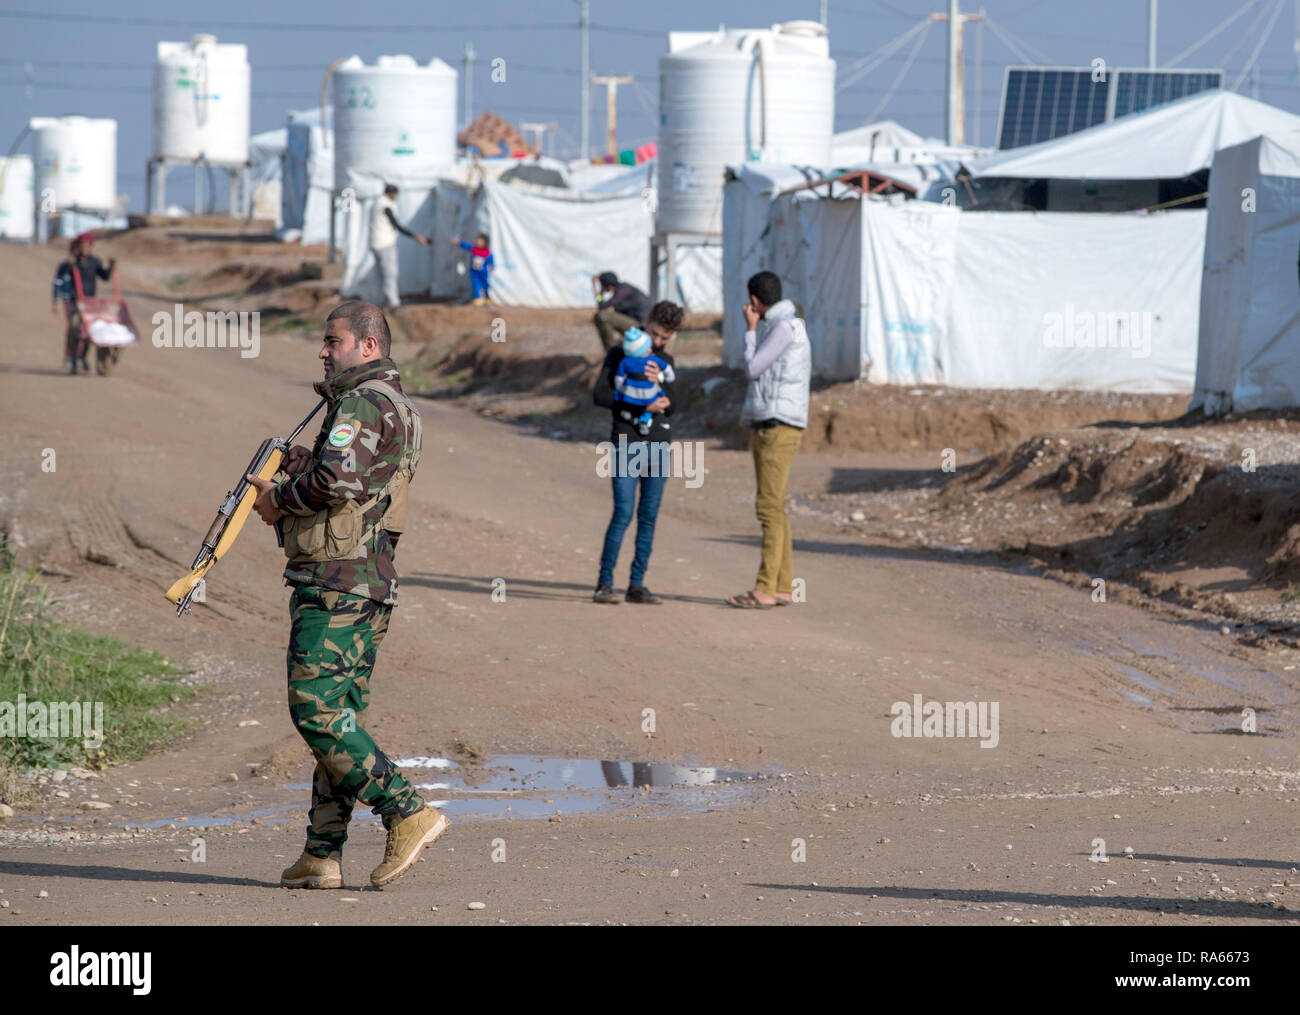 19 December 2018, Iraq, Hasan Sham: An armed employee of the domestic secret service of the Autonomous Region of Kurdistan, Asayî· (Asayesch) is in the internally displaced persons camp Hasan Sham. The secret service was founded in September 1993 and is mainly used in the fight against terrorism. Hasan Sham's tent camp near the largely destroyed former IS stronghold of Mossul accommodates 3,300 of the 1.8 million internally displaced persons in Iraq. Photo: Jens Büttner/dpa-Zentralbild/ZB Stock Photo